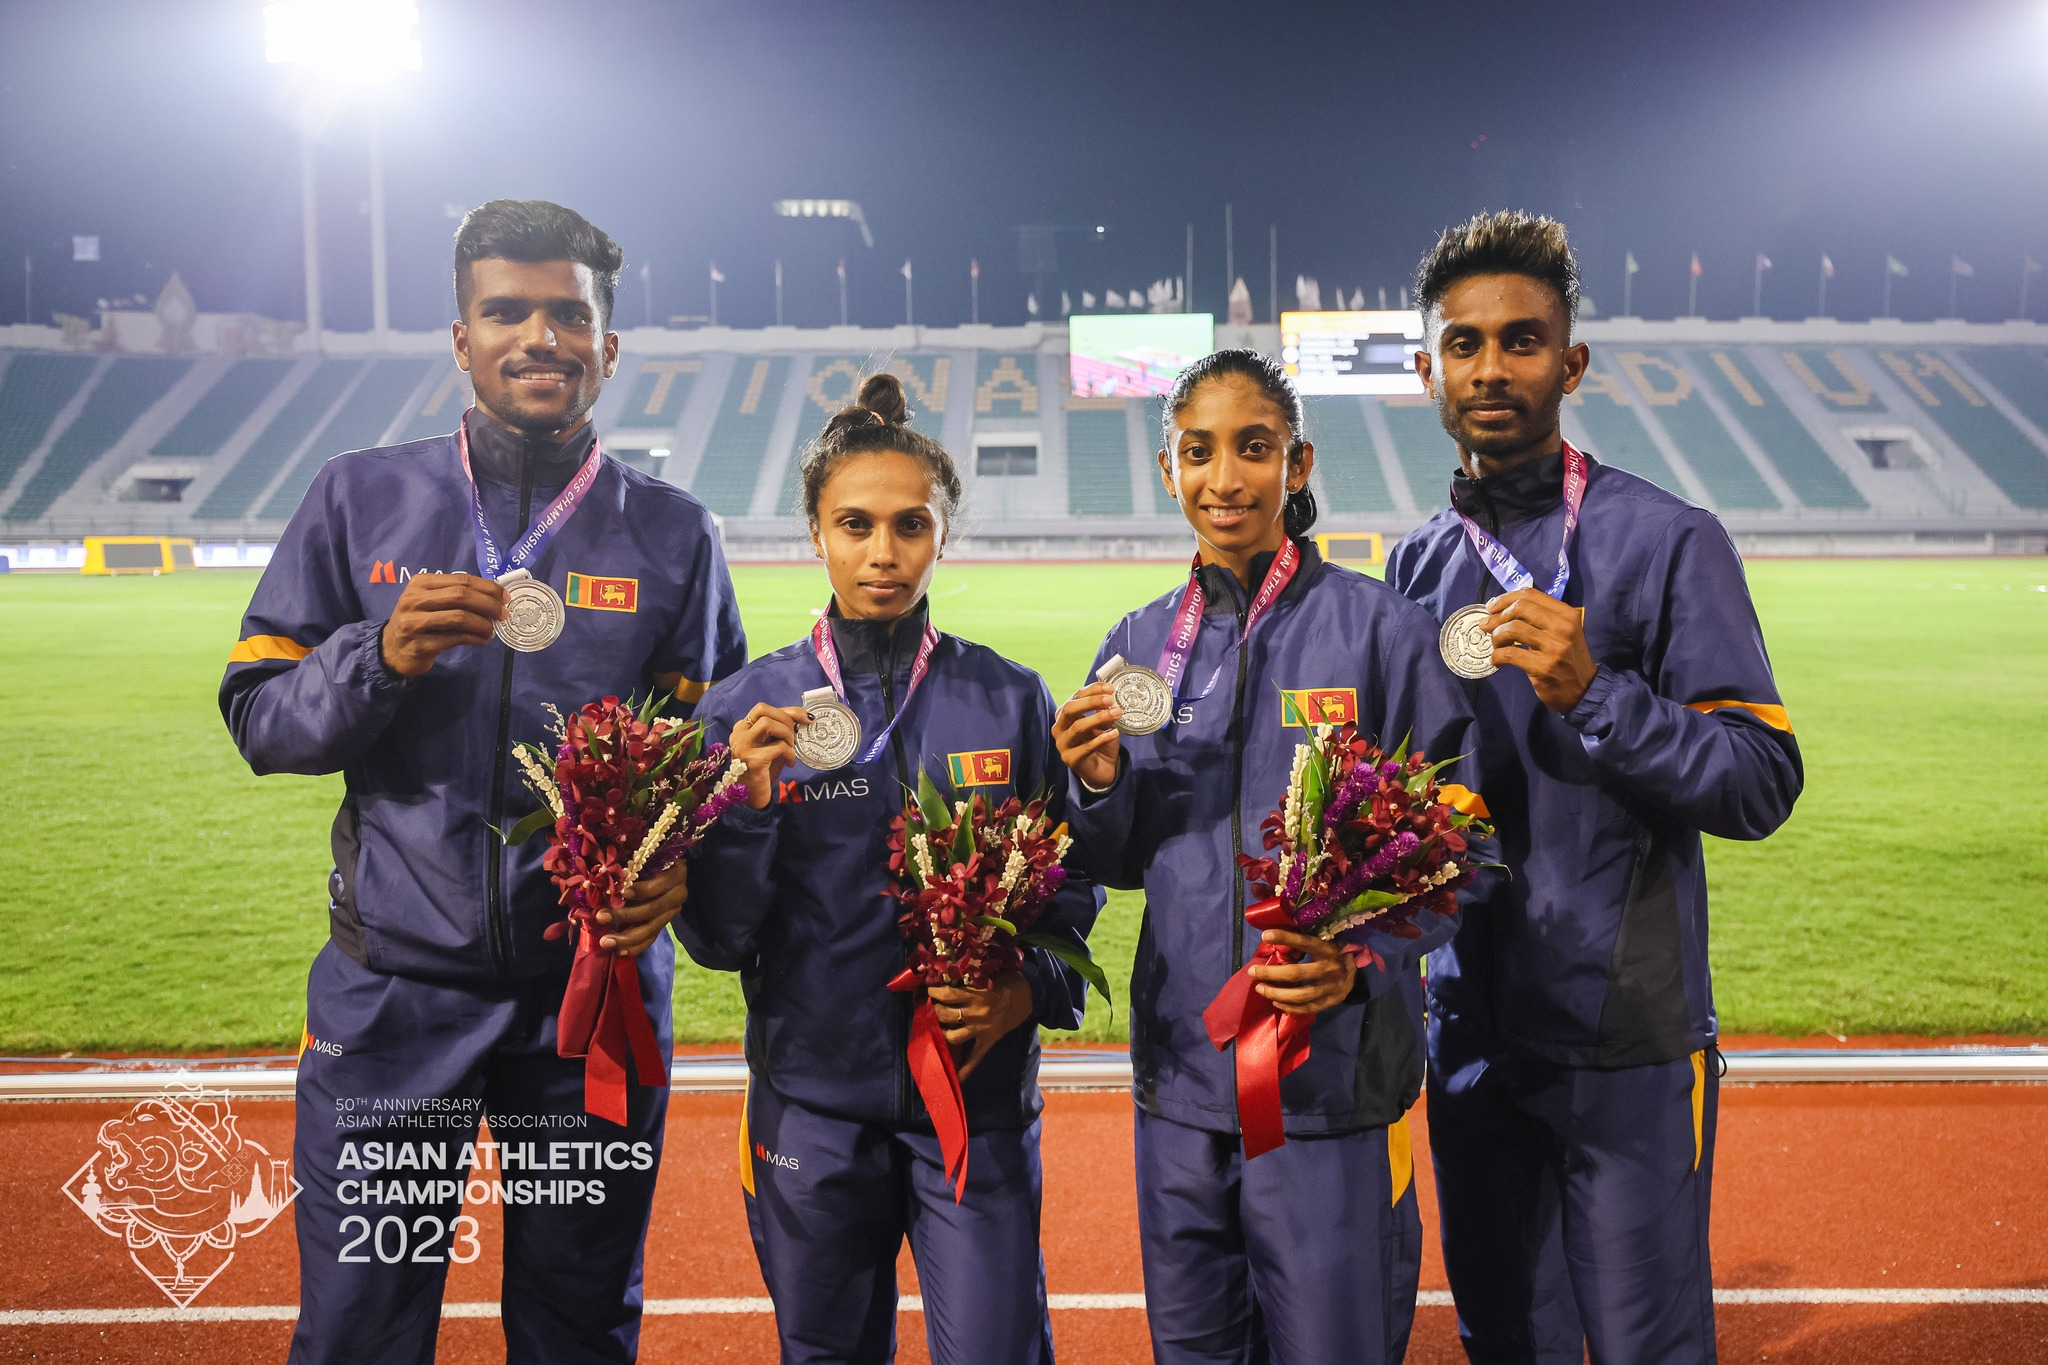 Sri Lanka Secures 4th Place at the 25th Asian Athletics Championships in Thailand